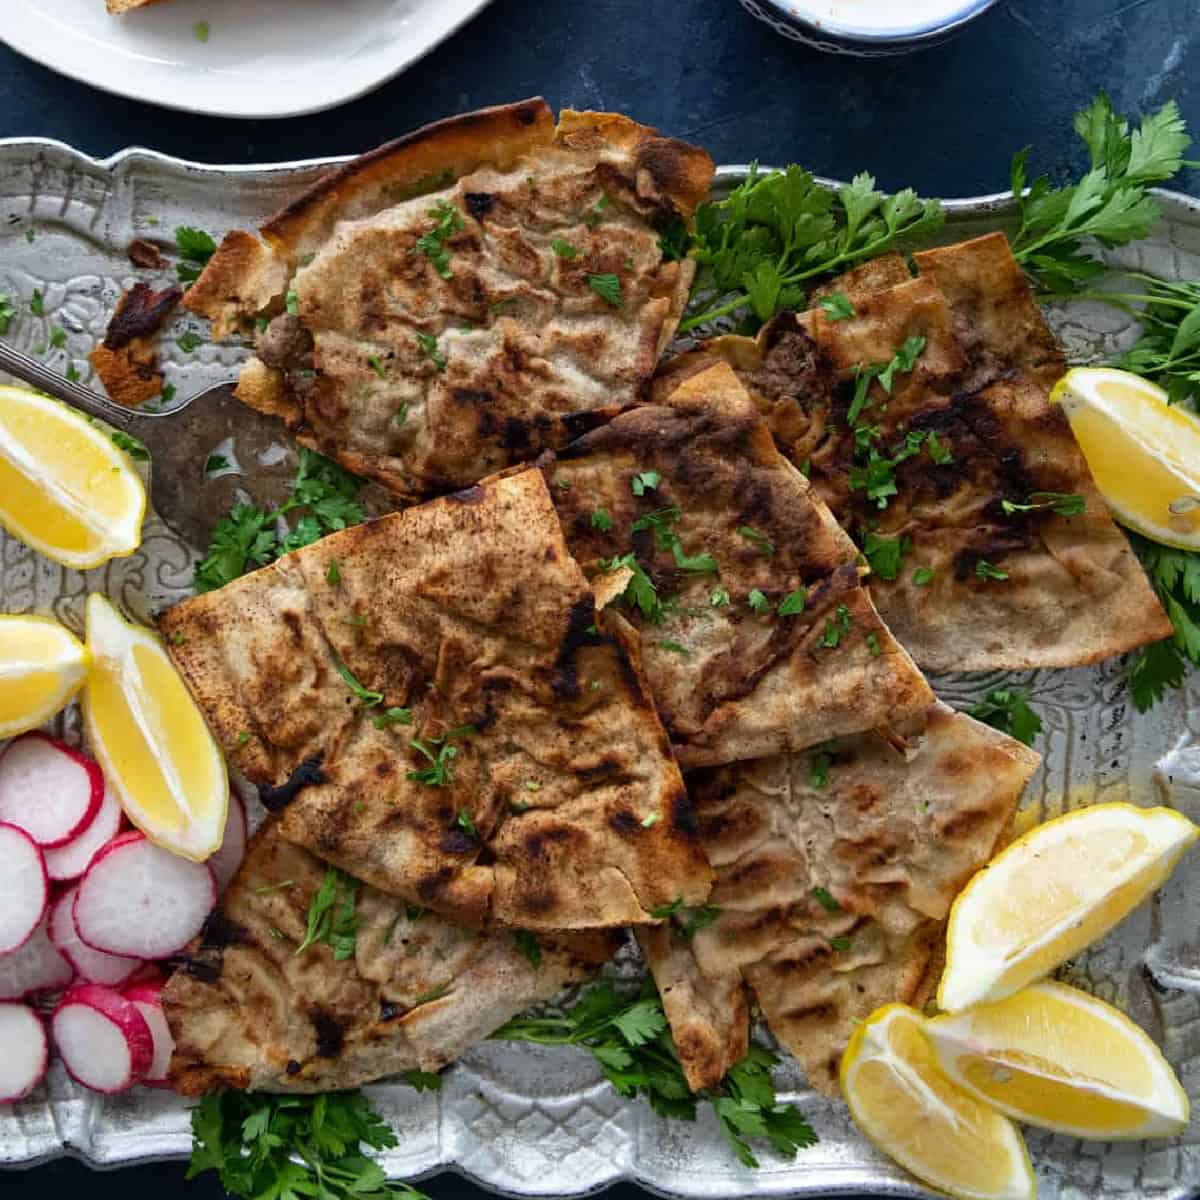 Arayes are Lebanese meat stuffed pitas that are so easy to make. This classic Middle Eastern street food is ready in 20 minutes, ideal for a weeknight dinner. Follow along to learn how to make delicious beef arayes at home with just a few ingredients!
